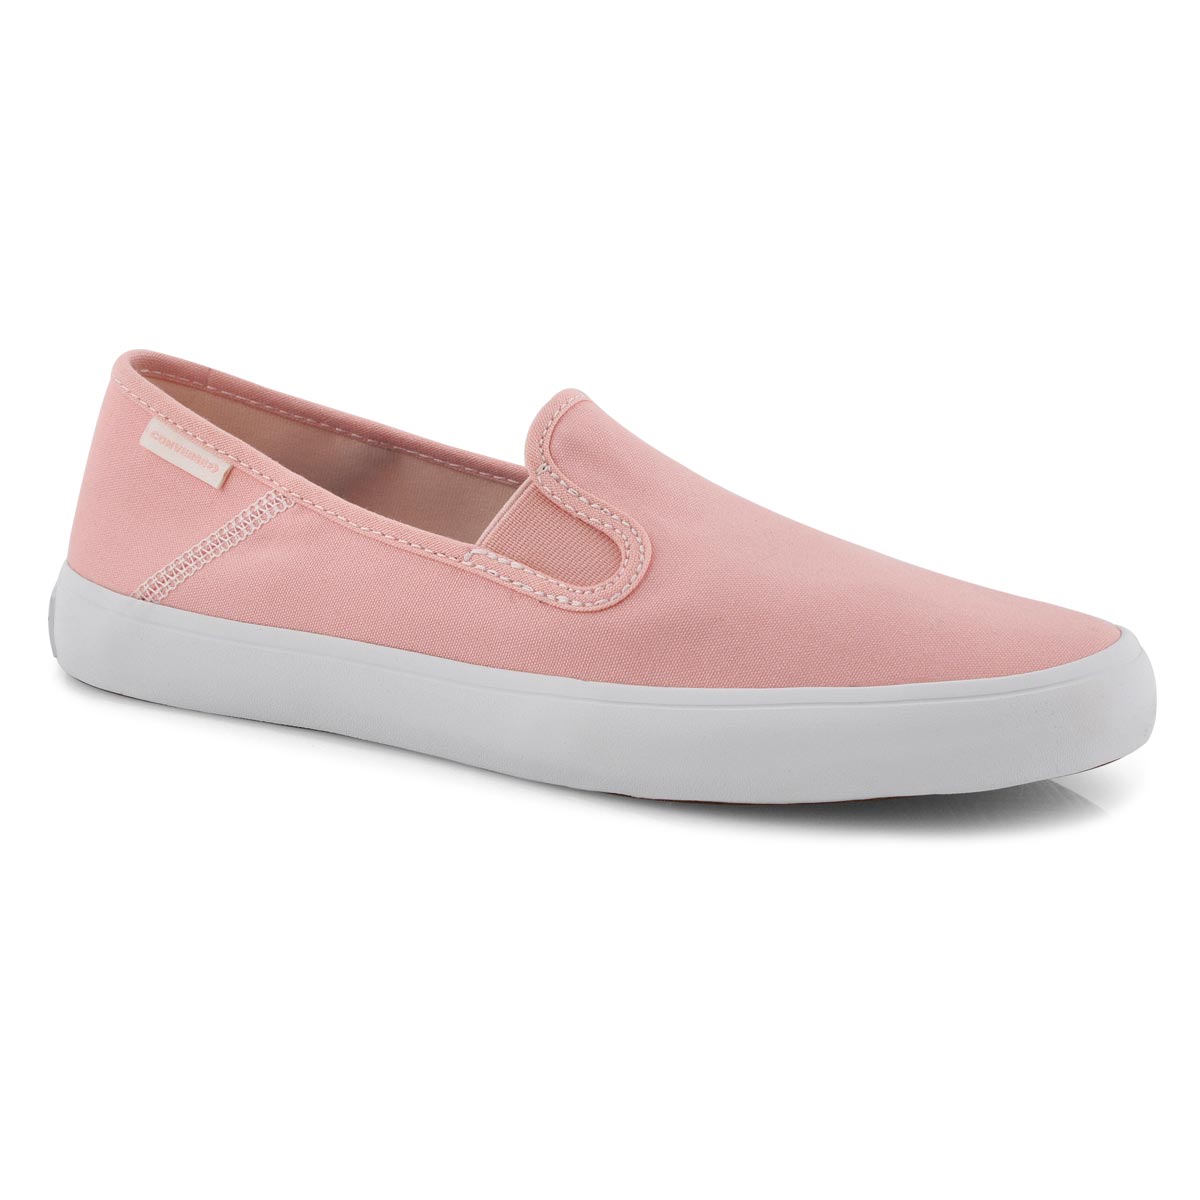 RIO bleached coral slip on 